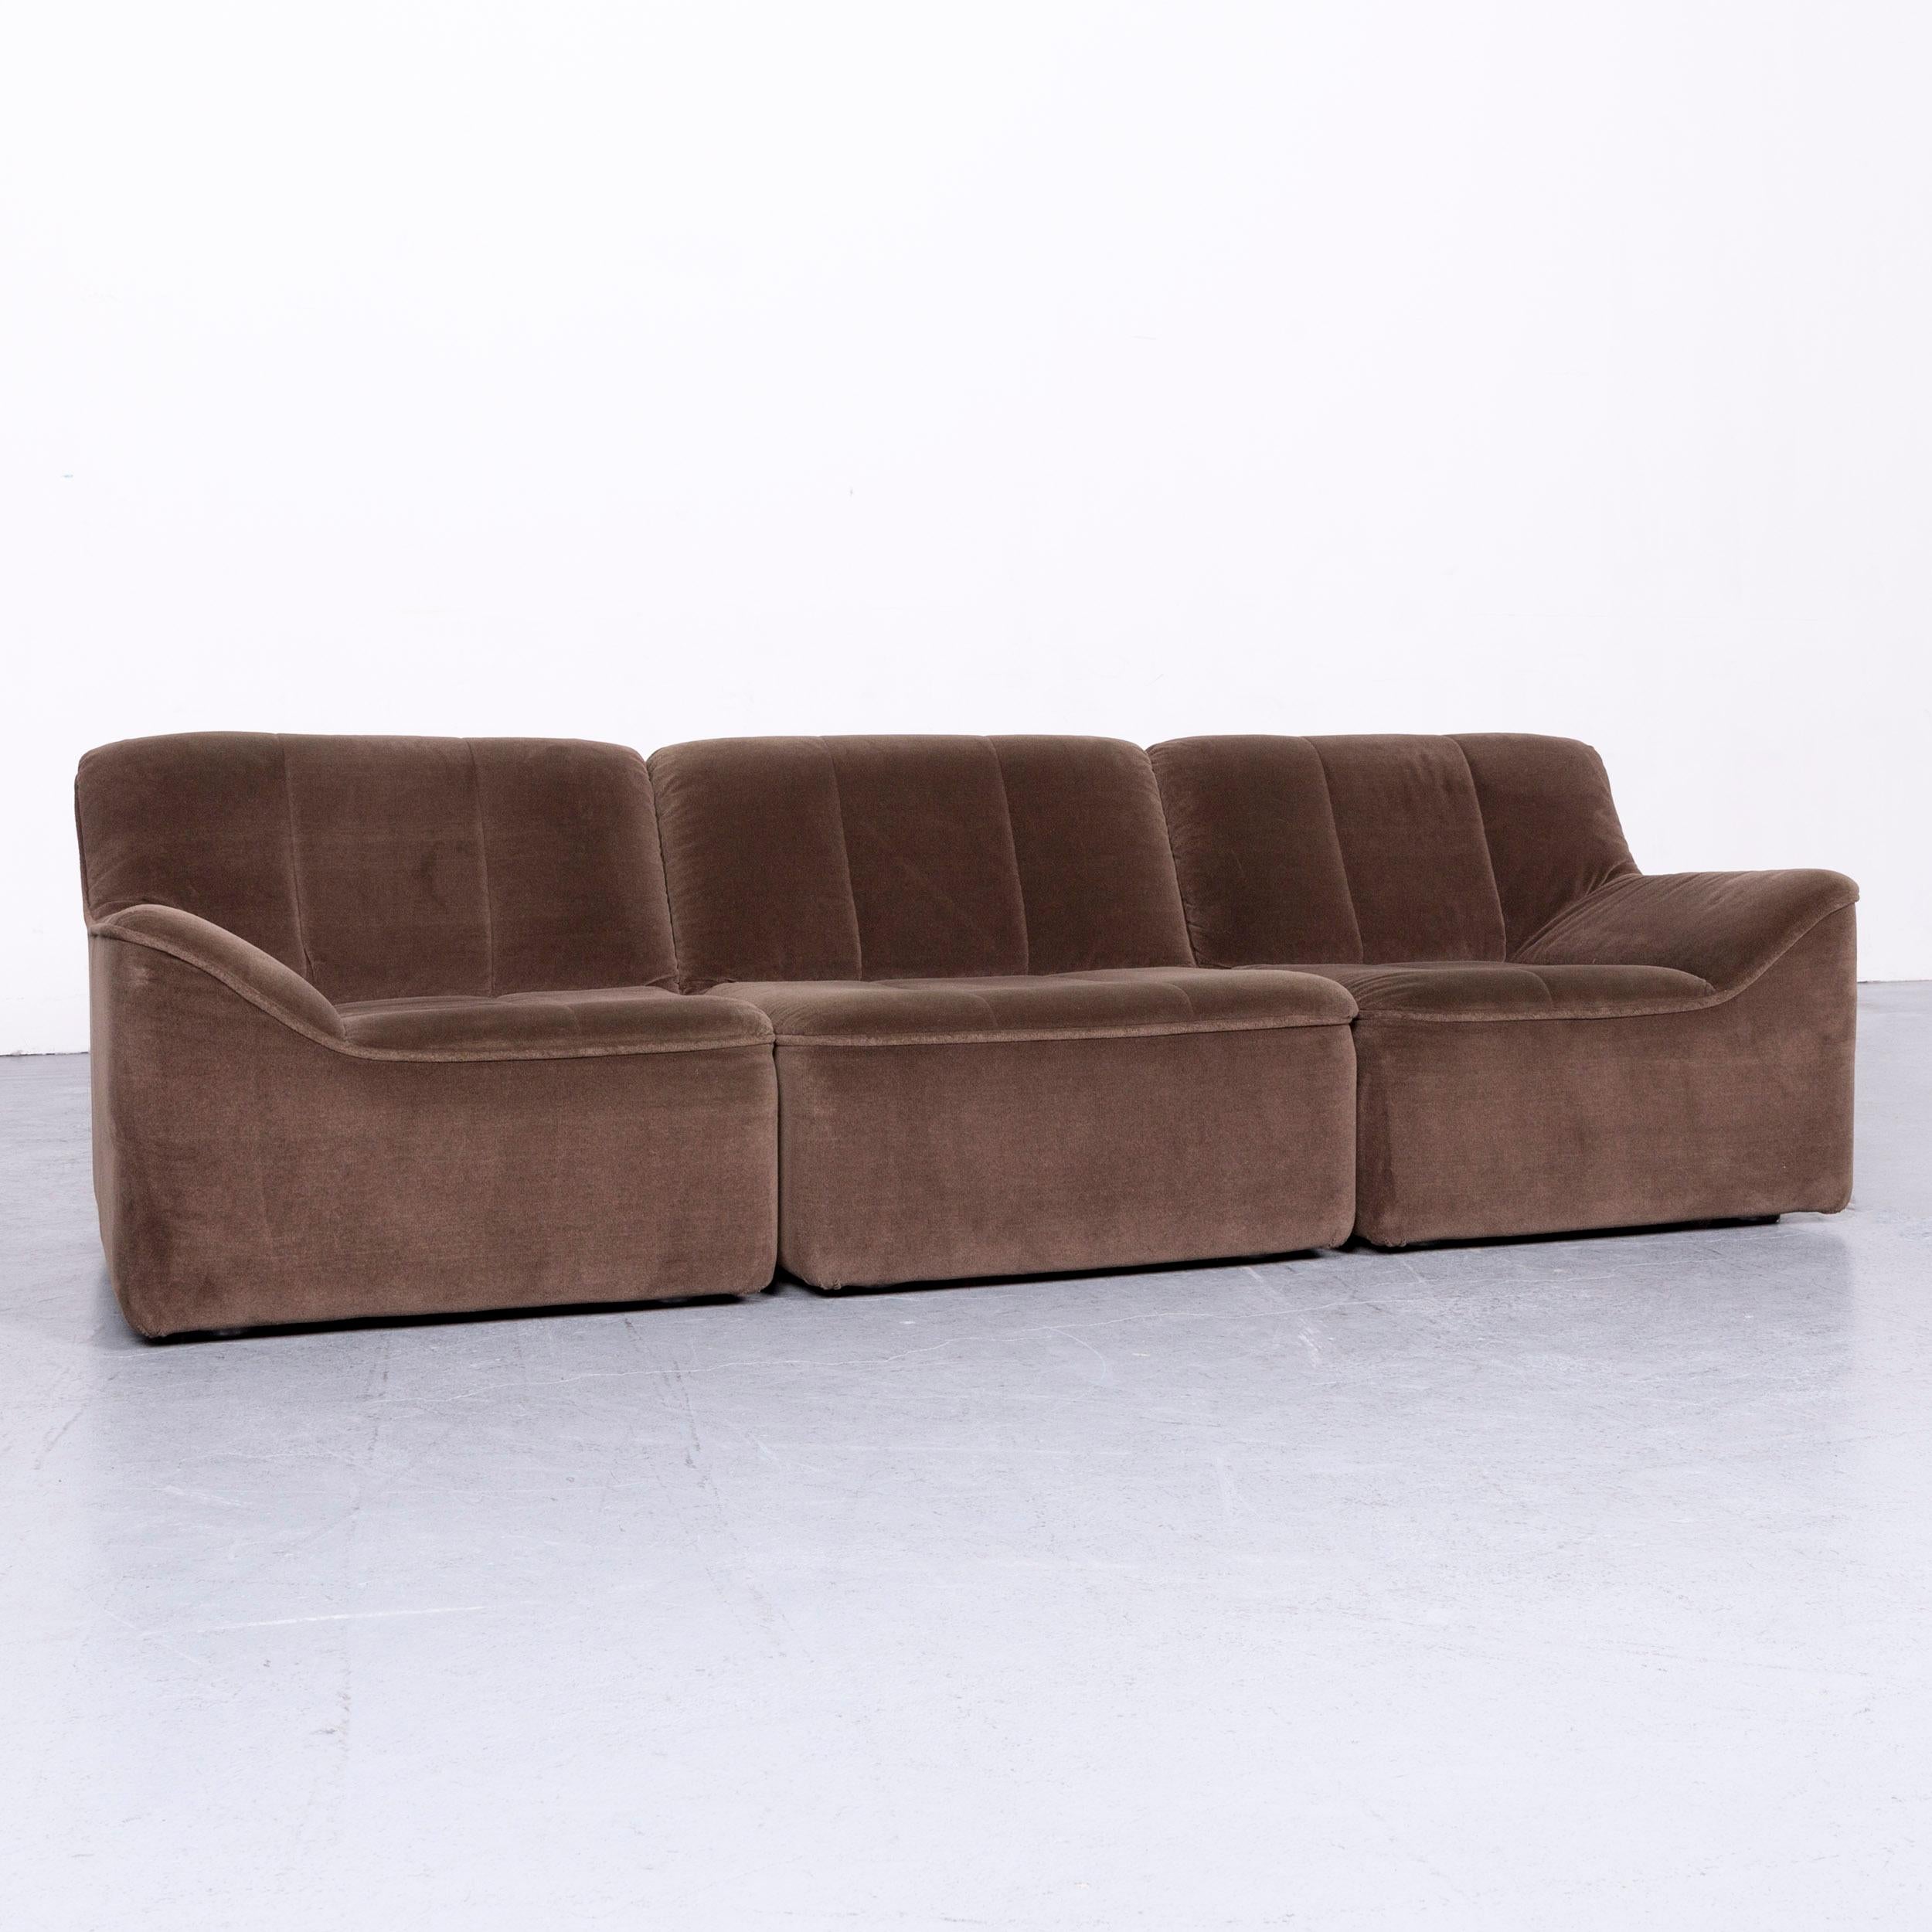 German COR Designer Fabric Sofa Brown Three-Seat Couch For Sale